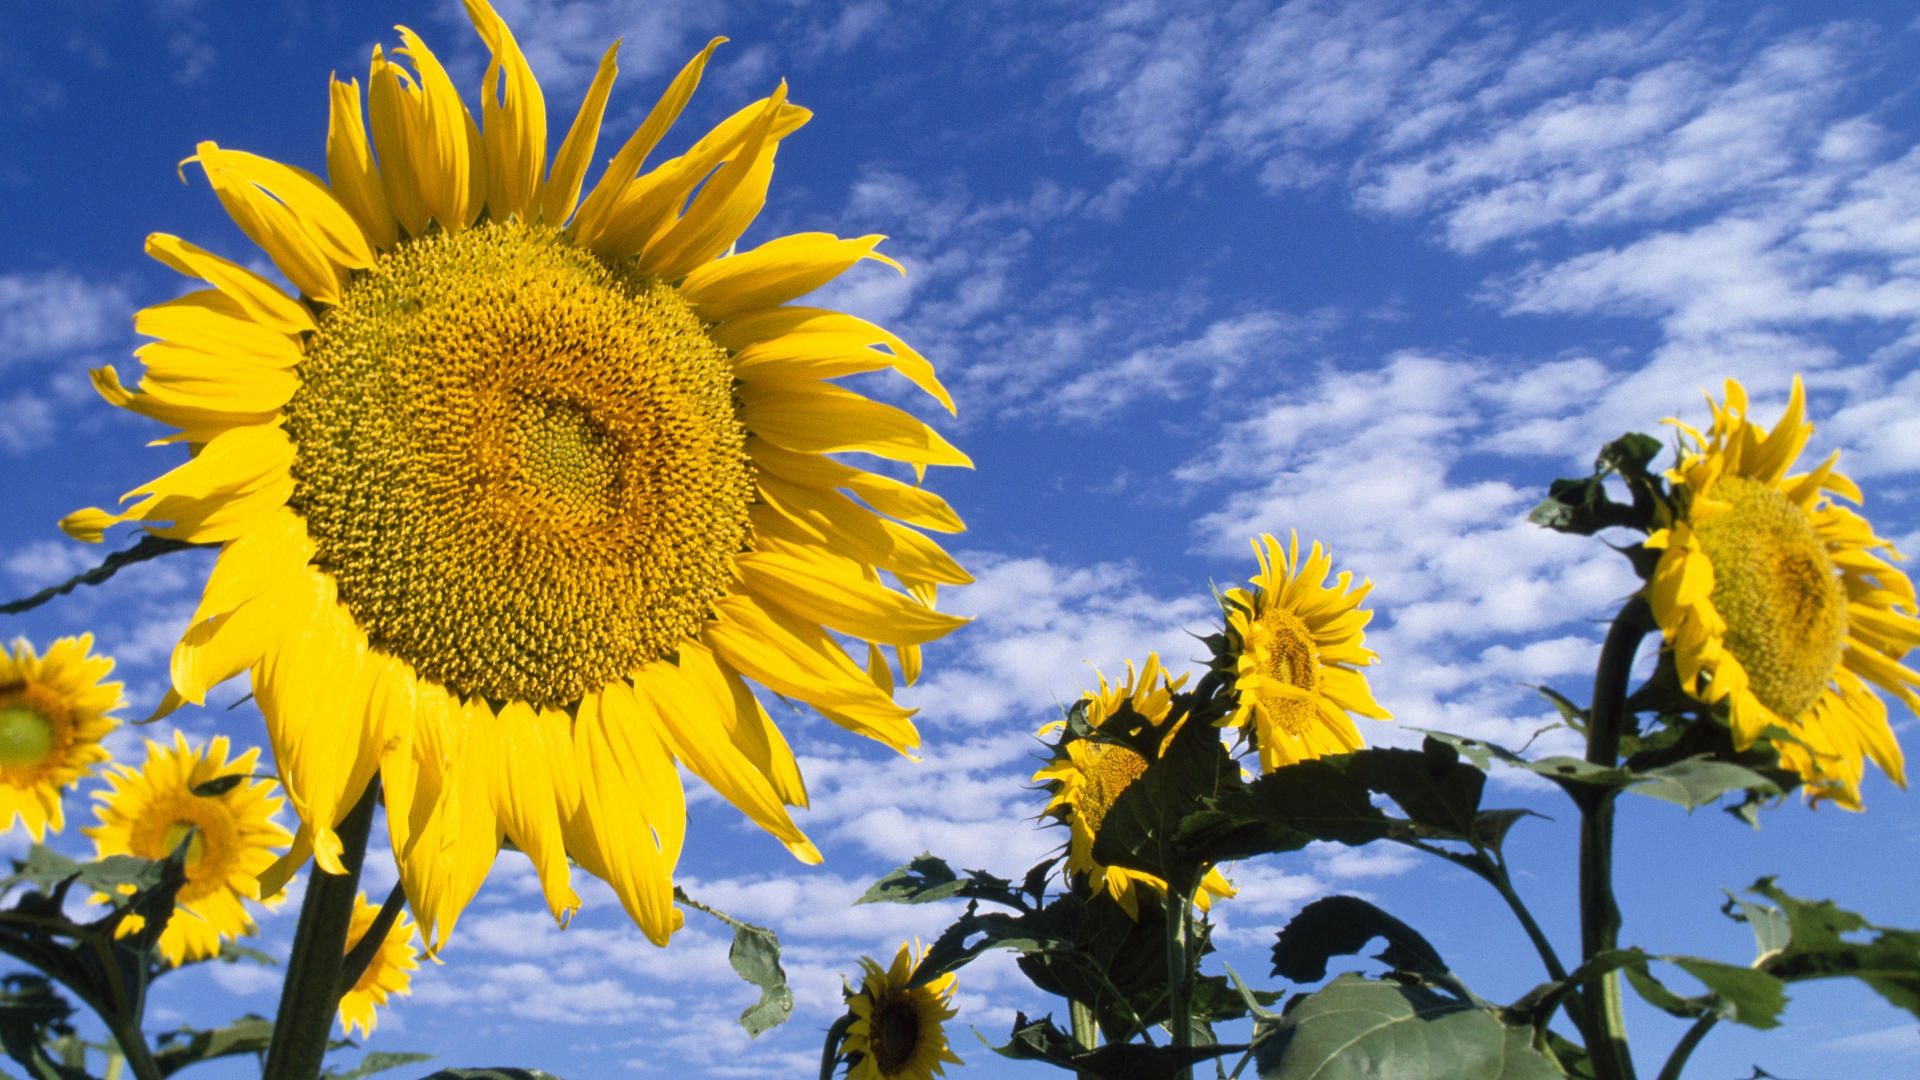 Download background sunflowers, nature, flowers, sky, clouds, summer, field